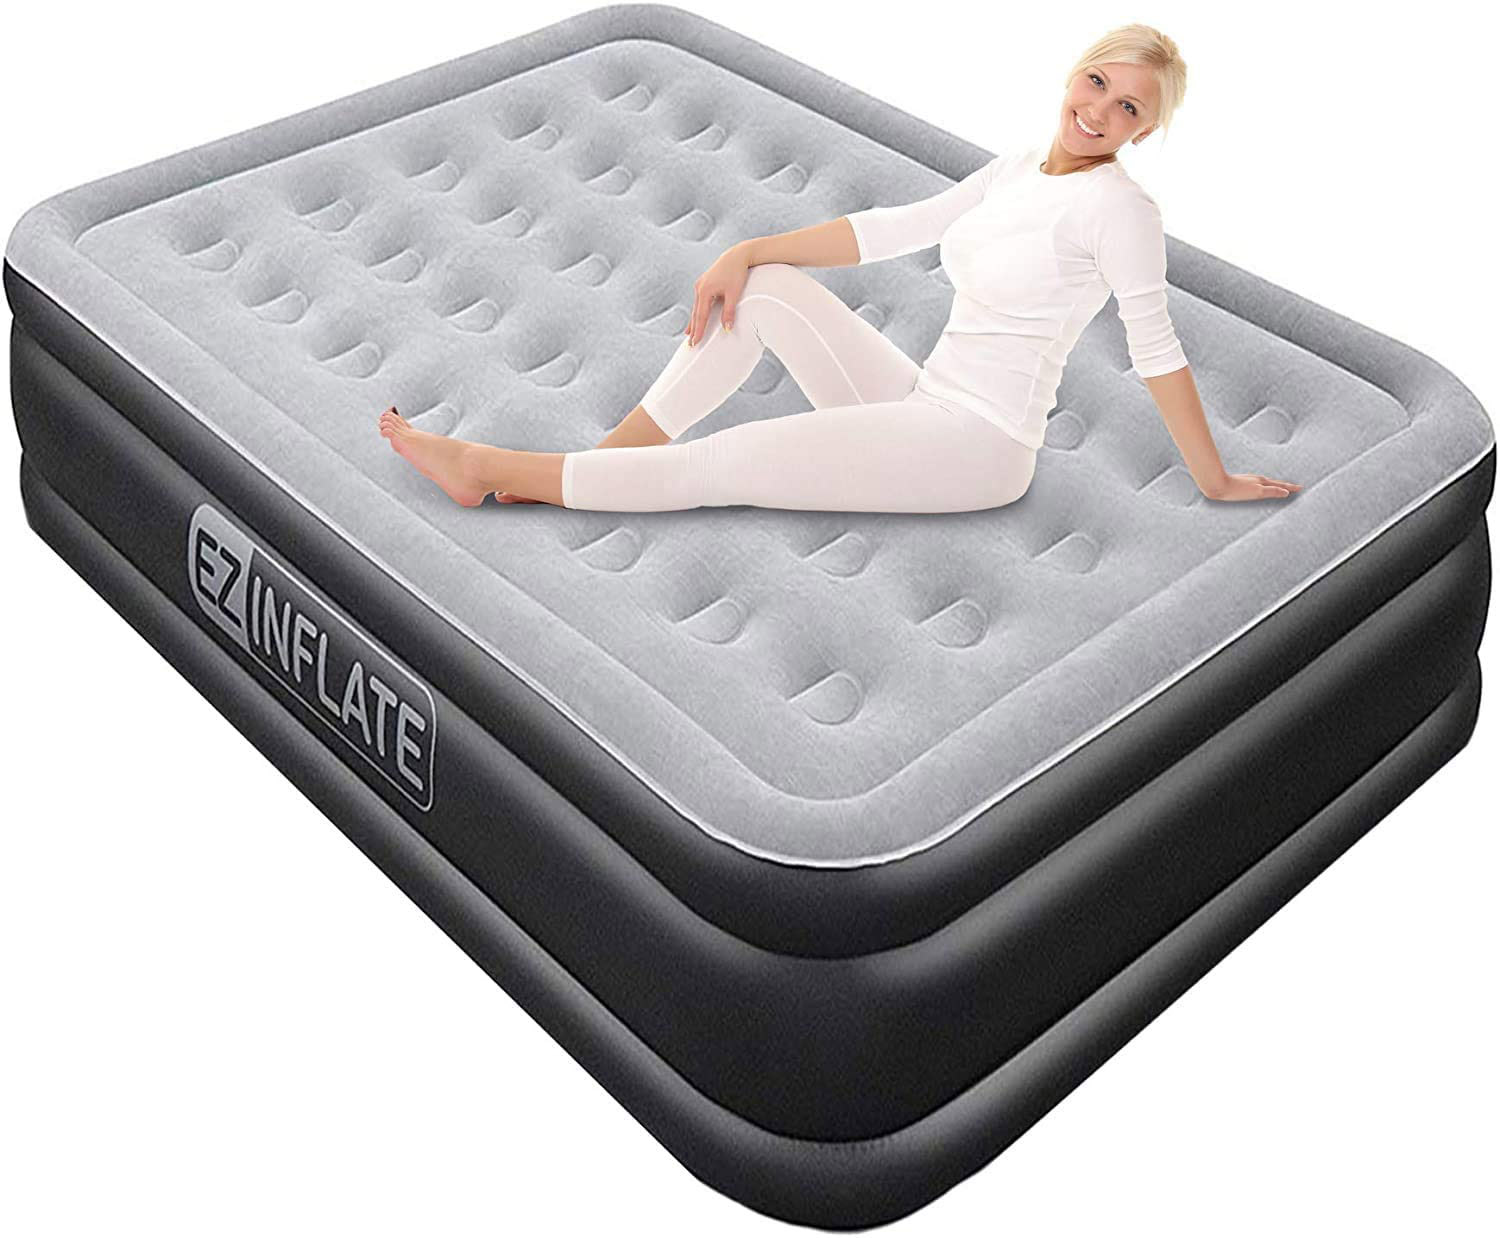 camping air mattress for heavy person